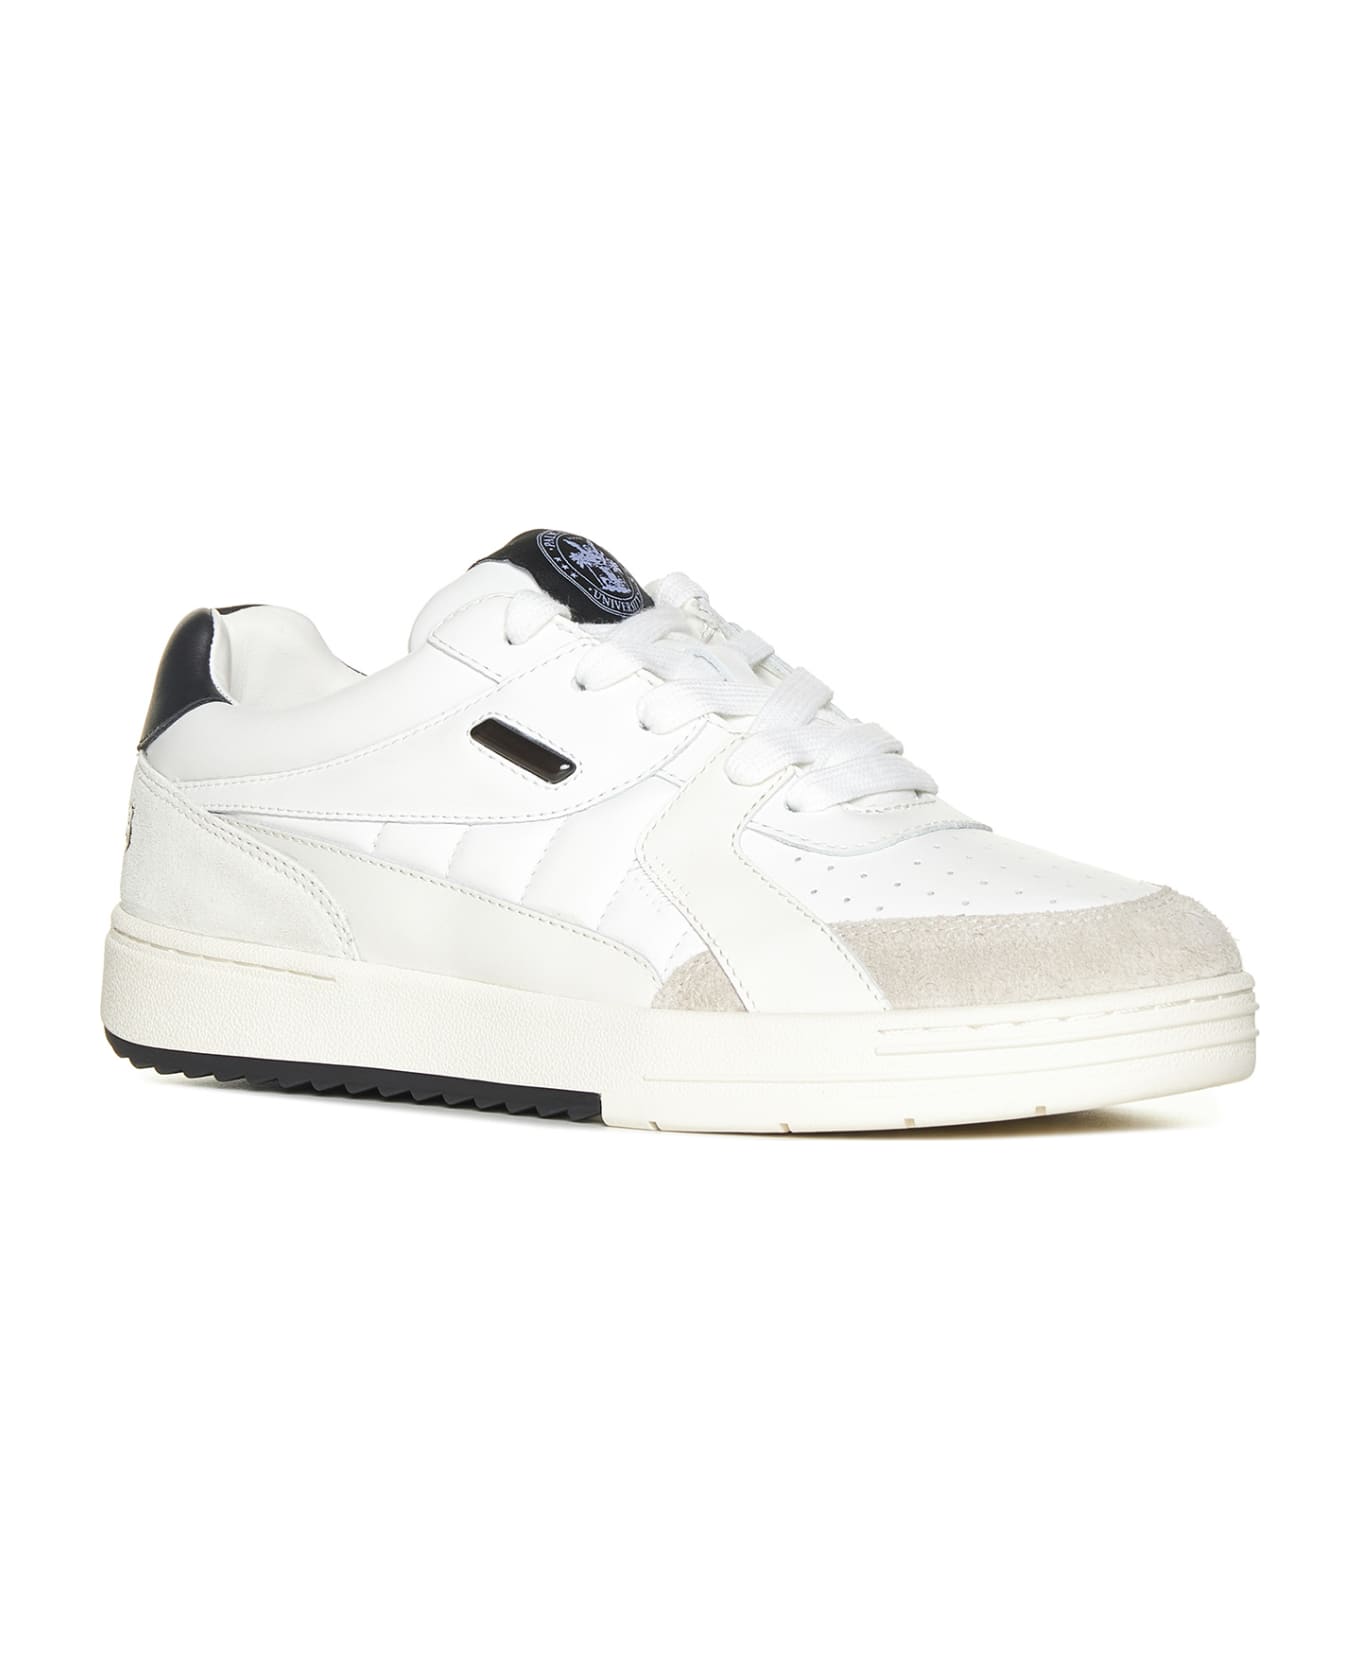 Palm Angels Sneakers - White BLACK